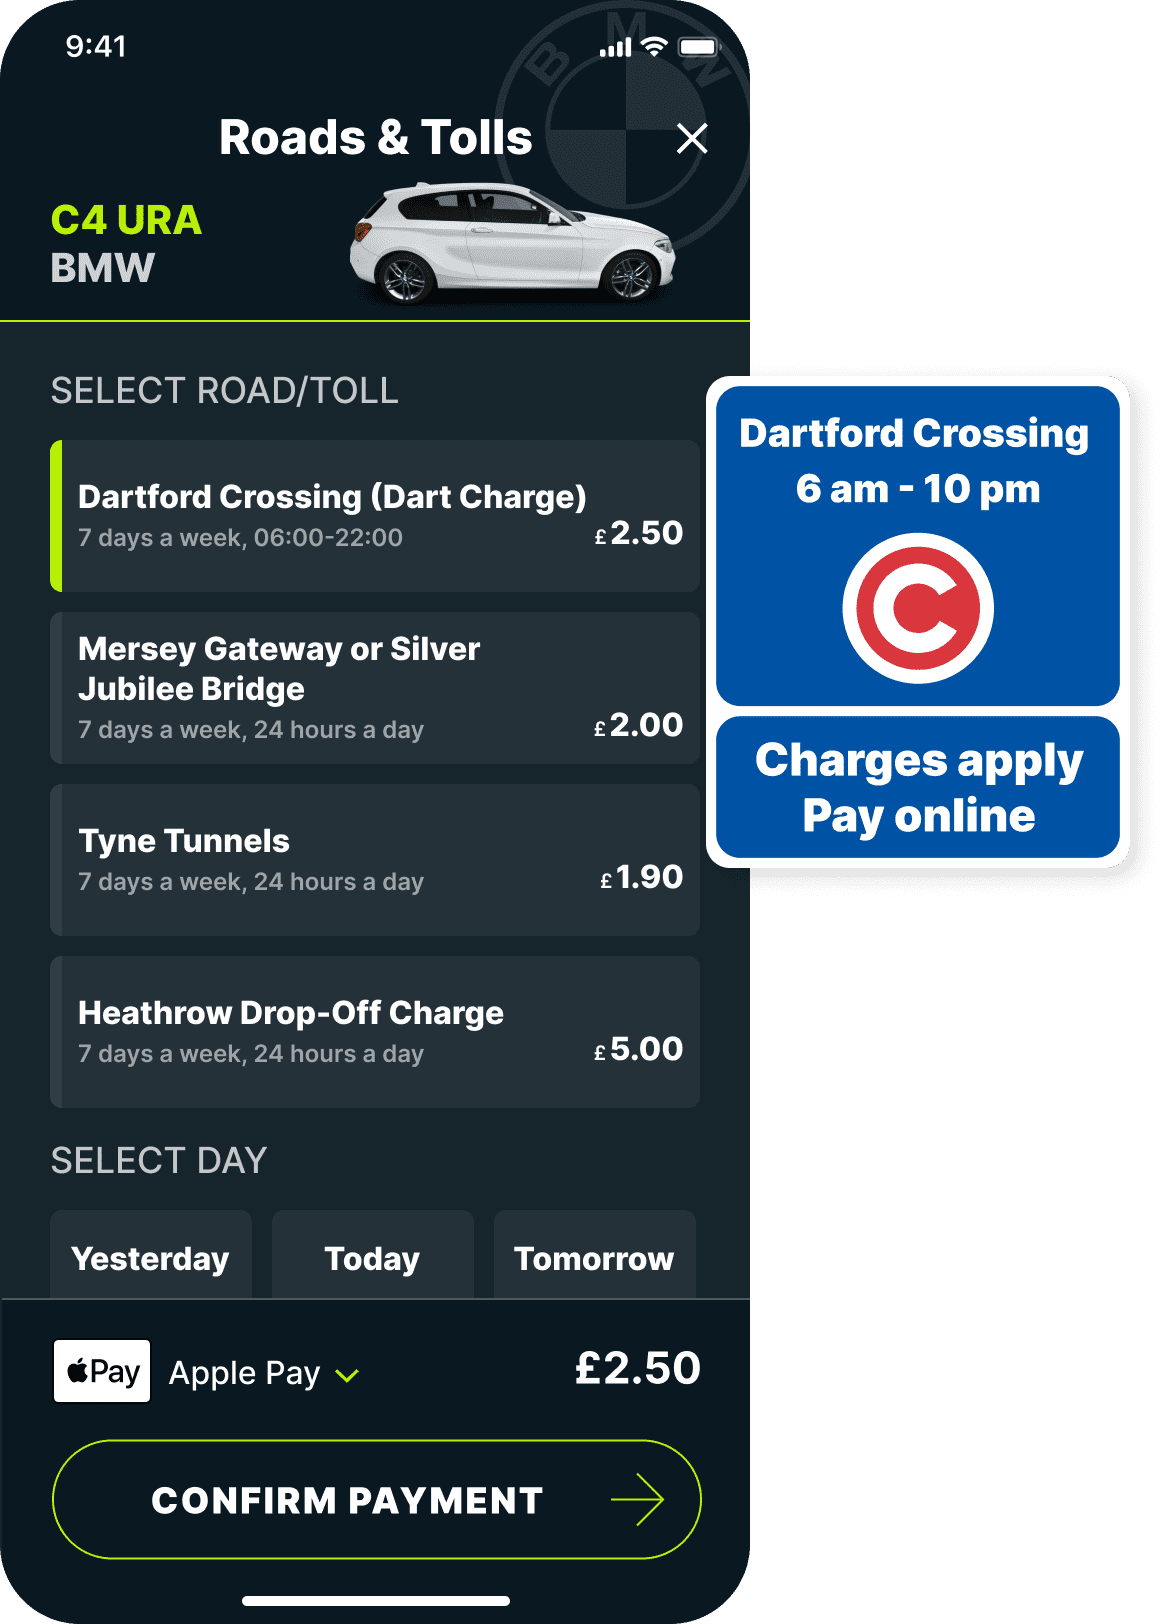 dart charge on the Caura app screen with the dartford crossing road sign